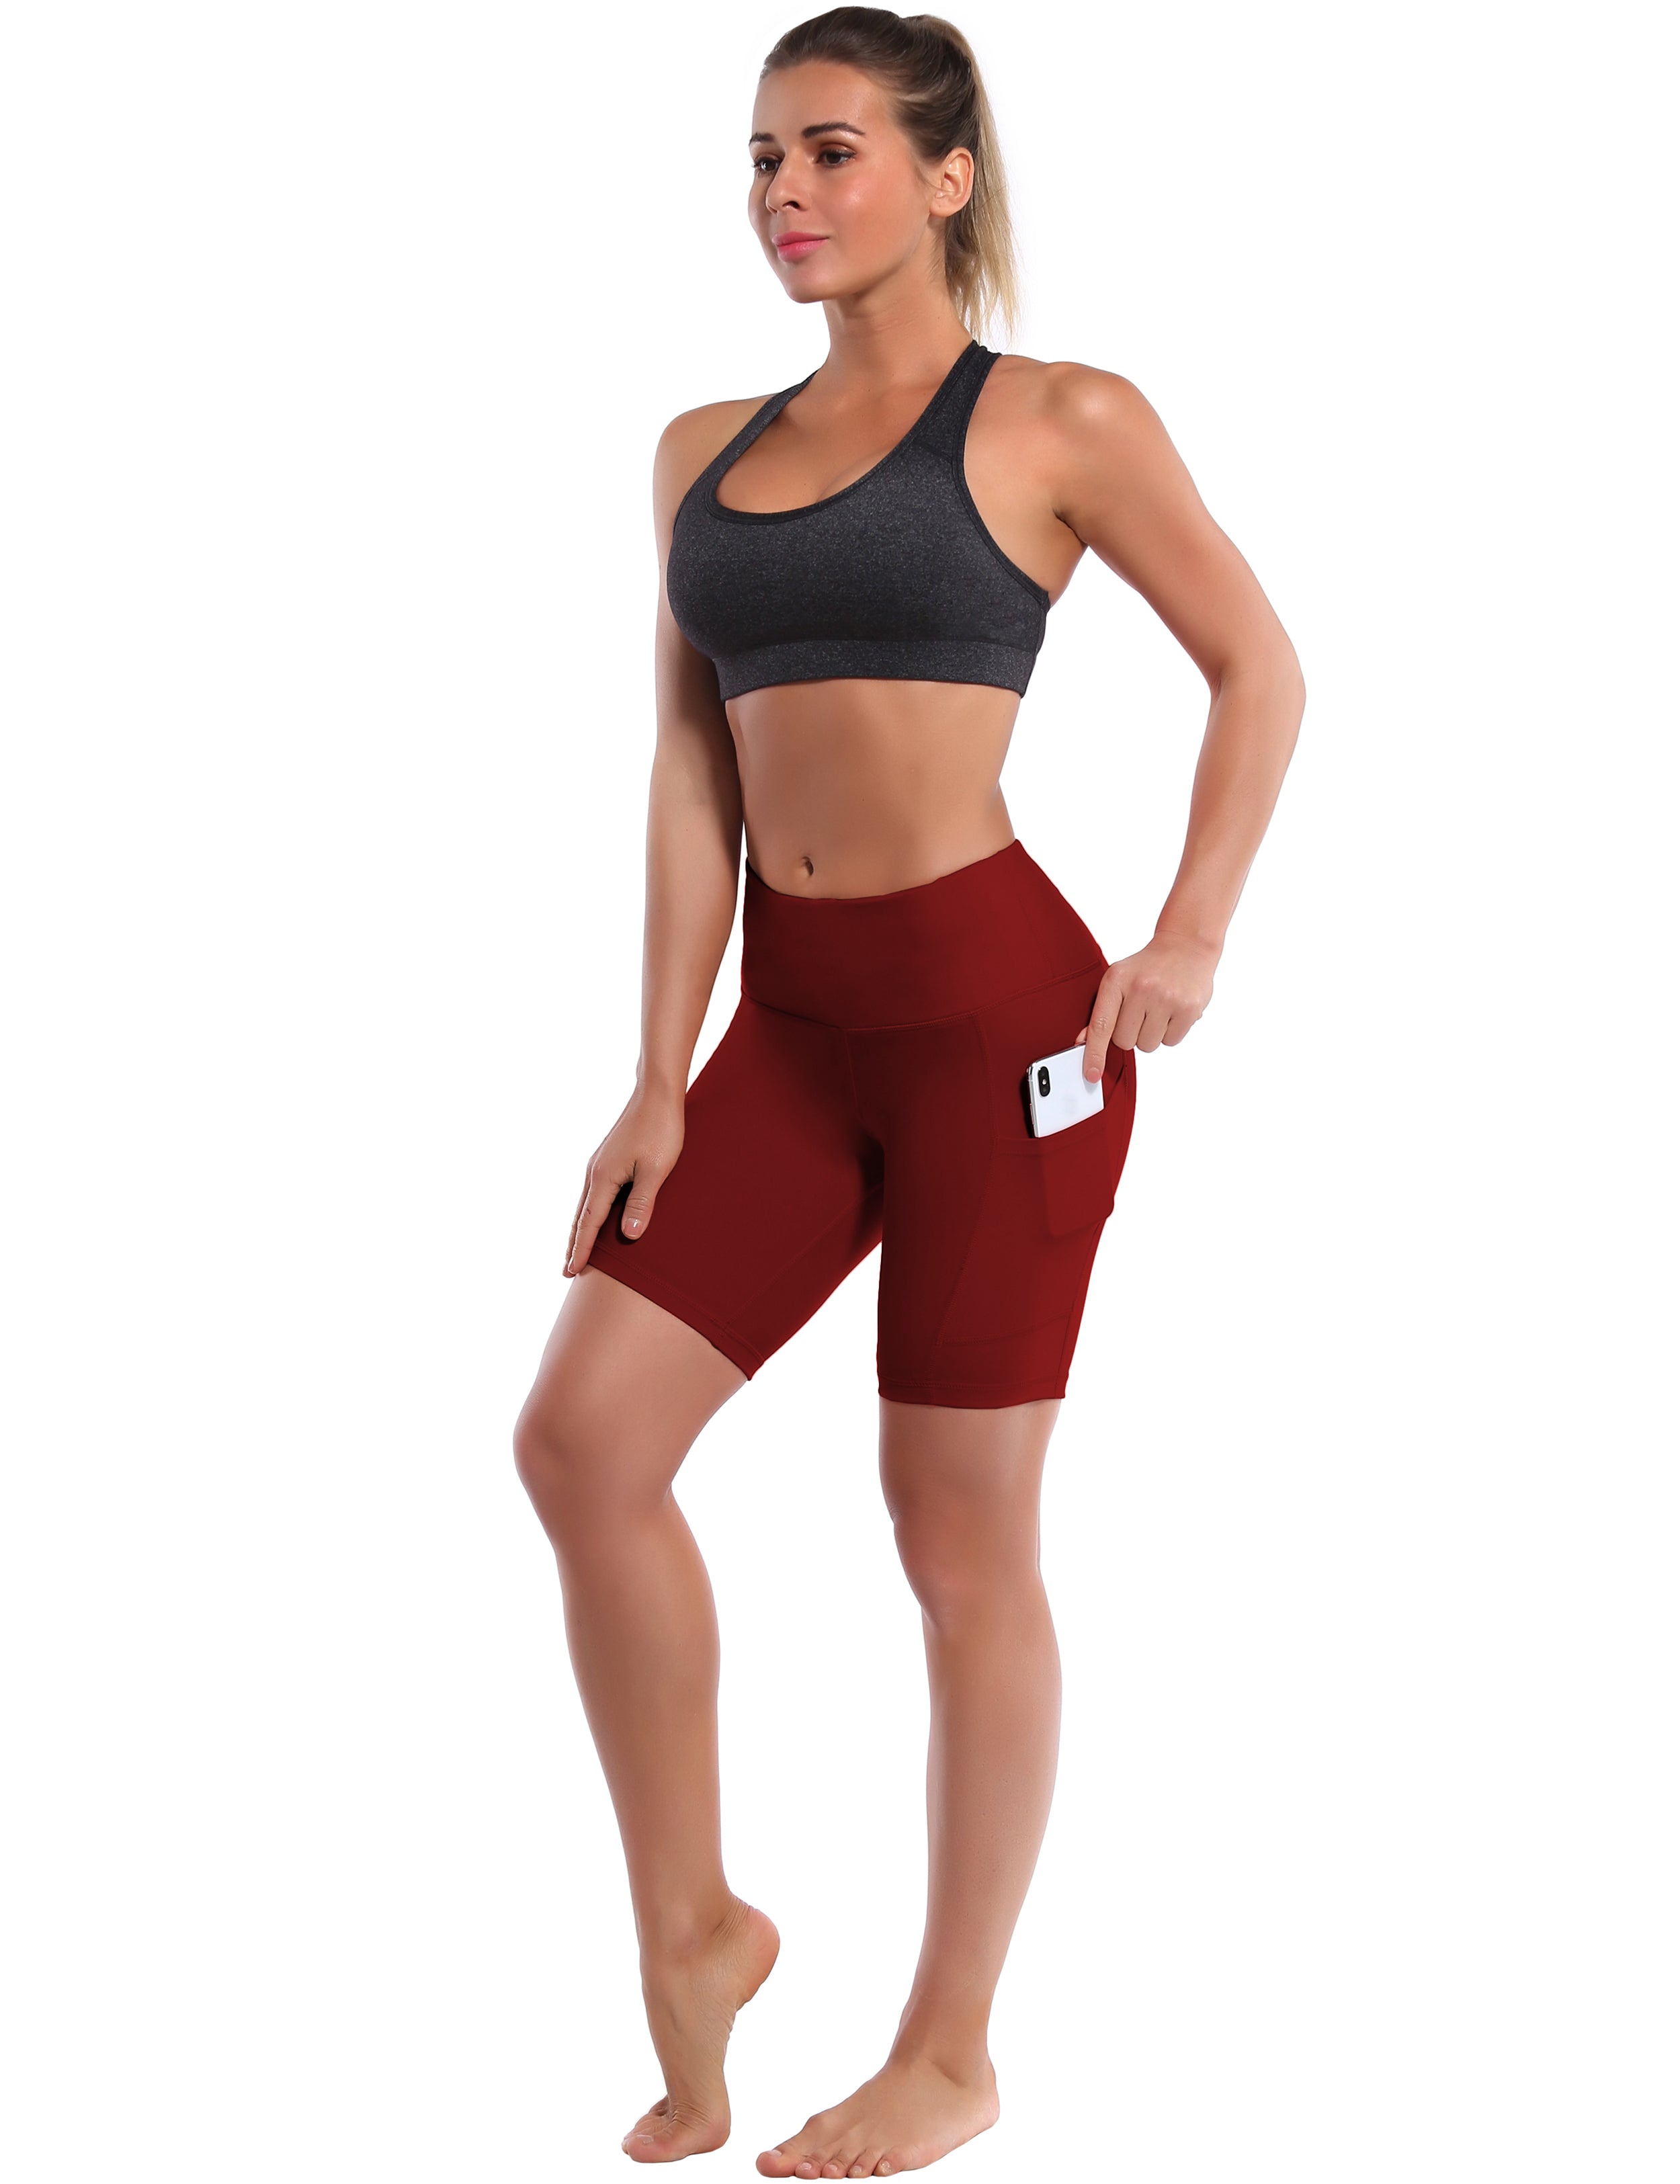 8" Side Pockets Golf Shorts cherryred Sleek, soft, smooth and totally comfortable: our newest style is here. Softest-ever fabric High elasticity High density 4-way stretch Fabric doesn't attract lint easily No see-through Moisture-wicking Machine wash 75% Nylon, 25% Spandex